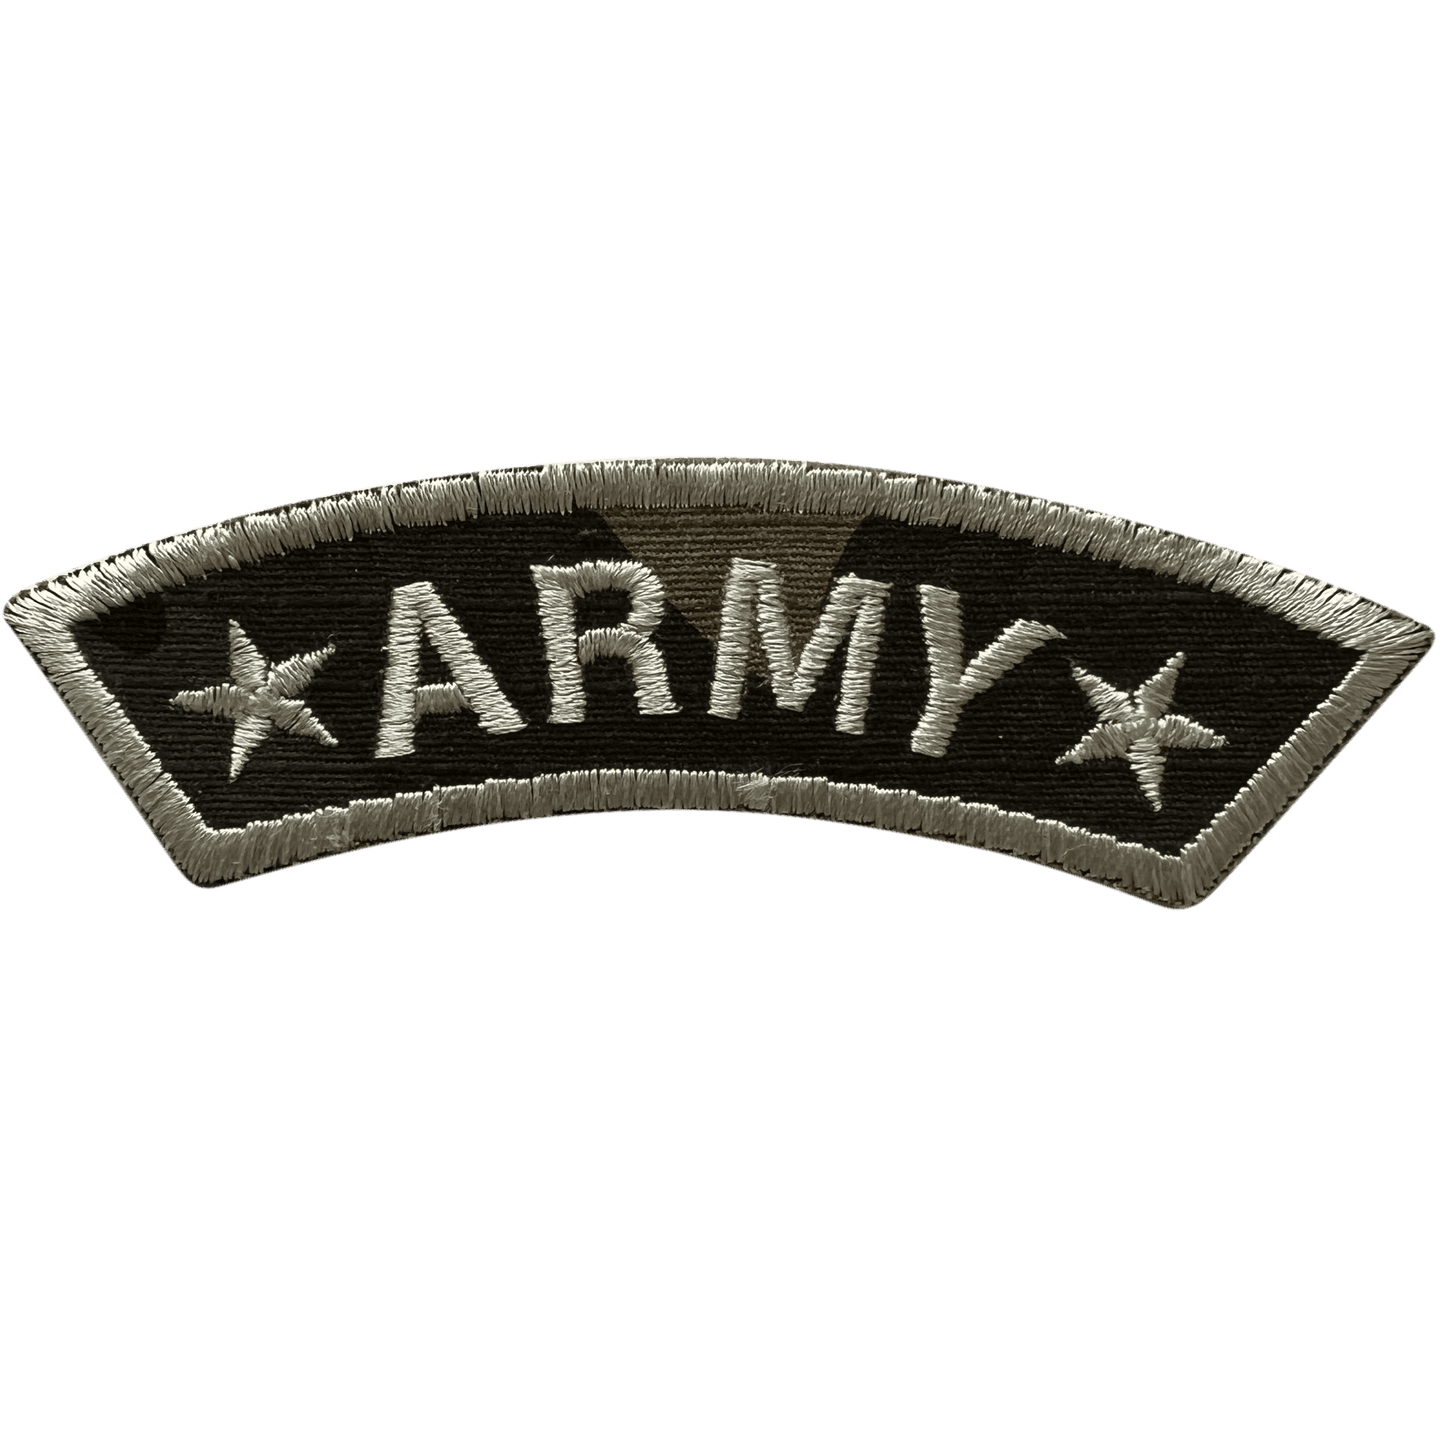 ARMY Patch Iron Sew On Jacket Bag Cap Clothes Stars Camouflage Embroidered Badge